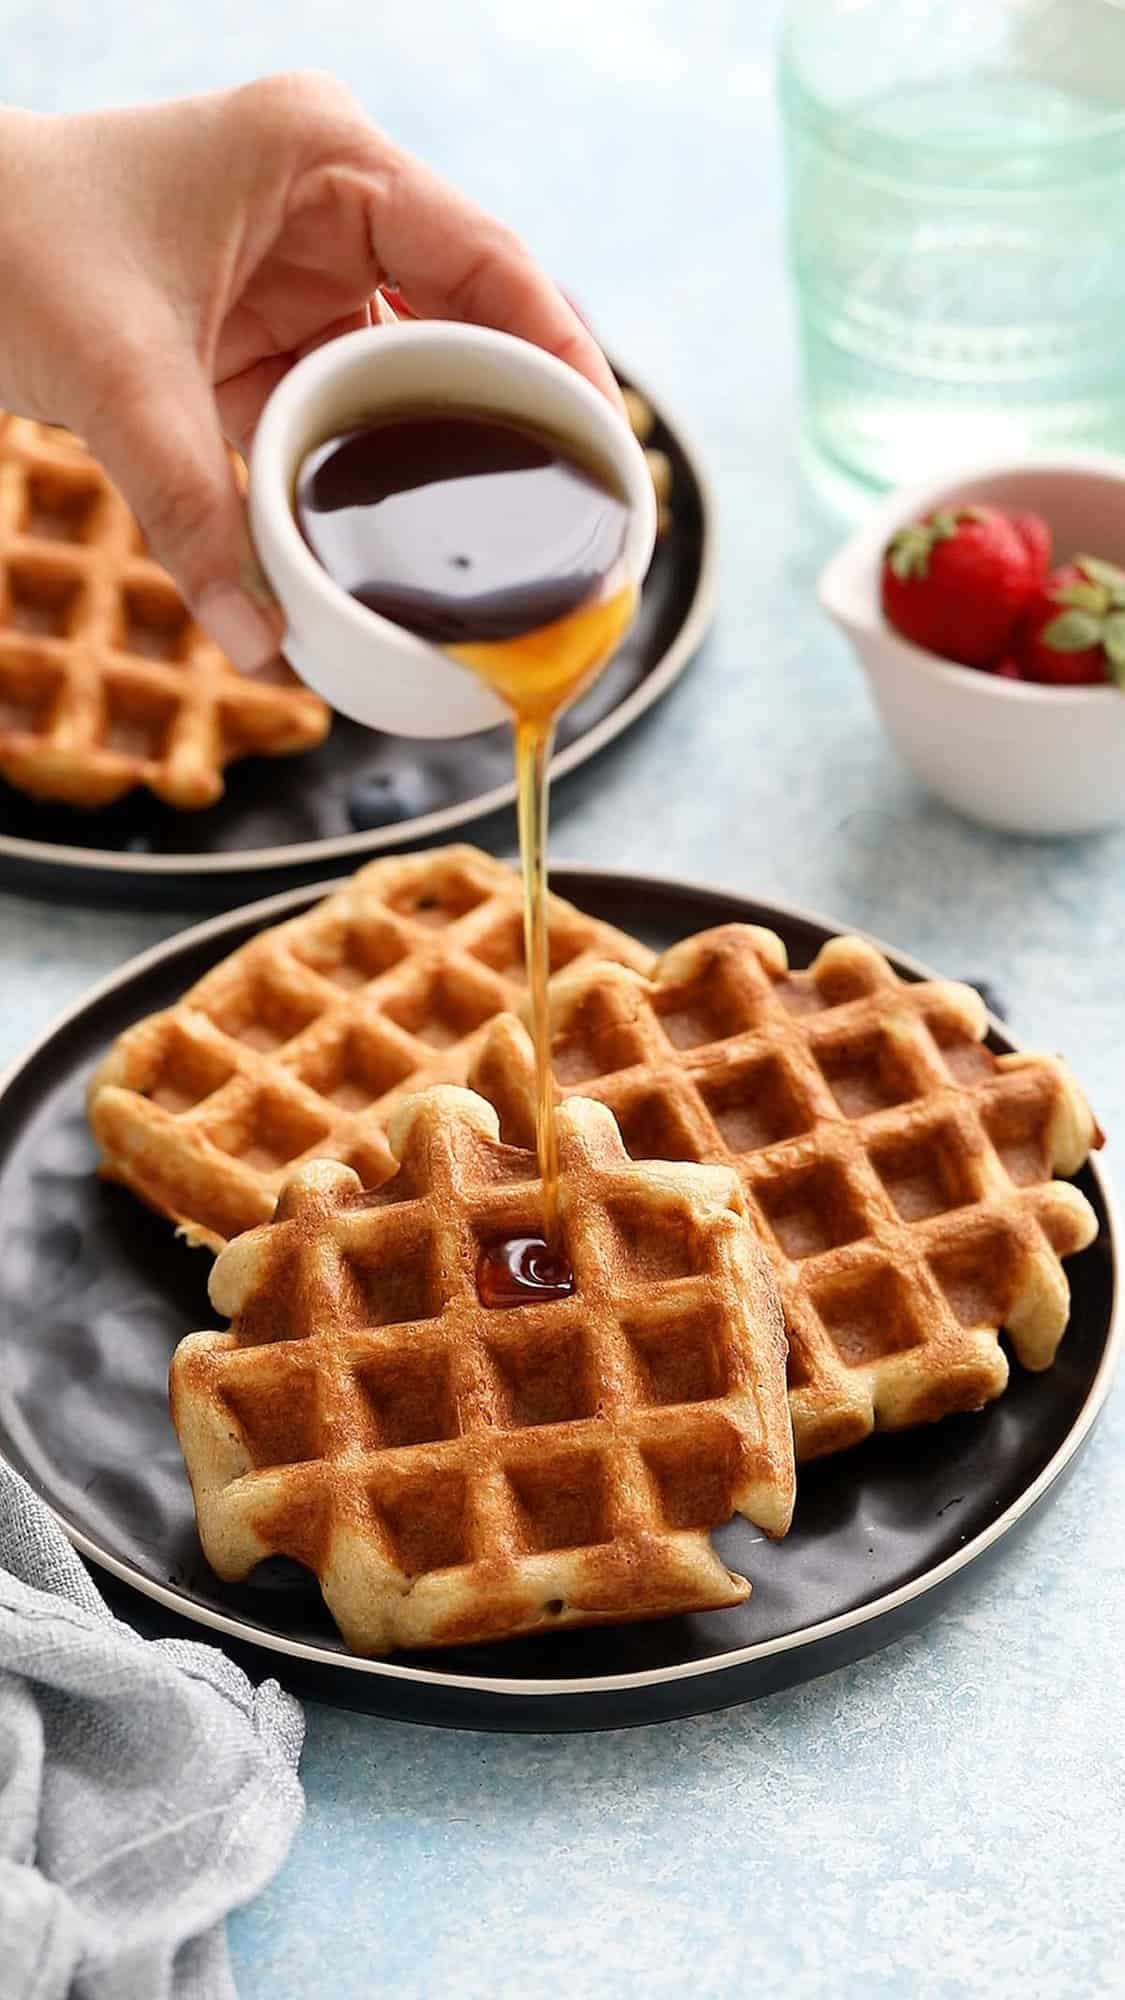 a hand pouring maple syrup on 3 three waffles placed on a black plate.